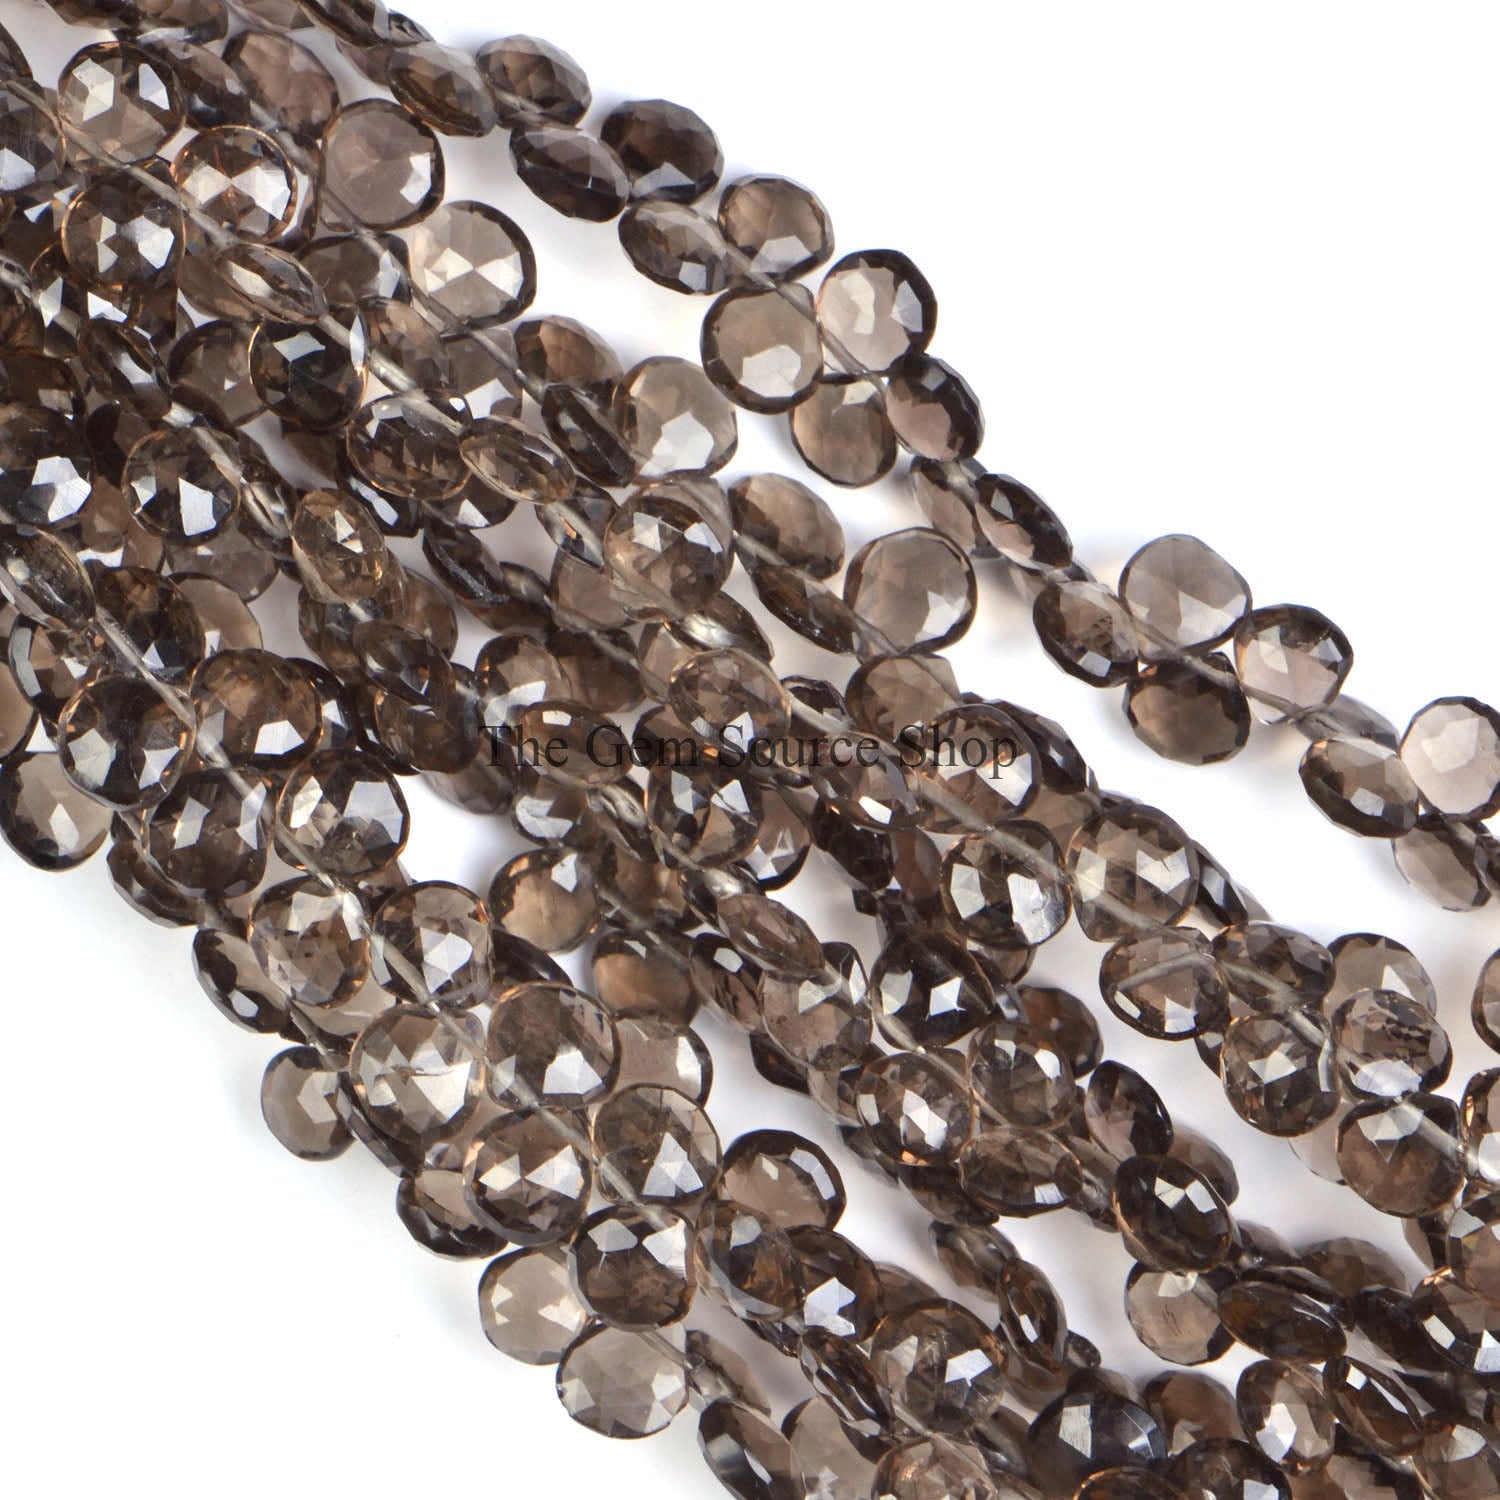 Smoky Quartz Beads, Faceted Heart Beads, Side Drill Heart Beads, Smoky Quartz Gemstone